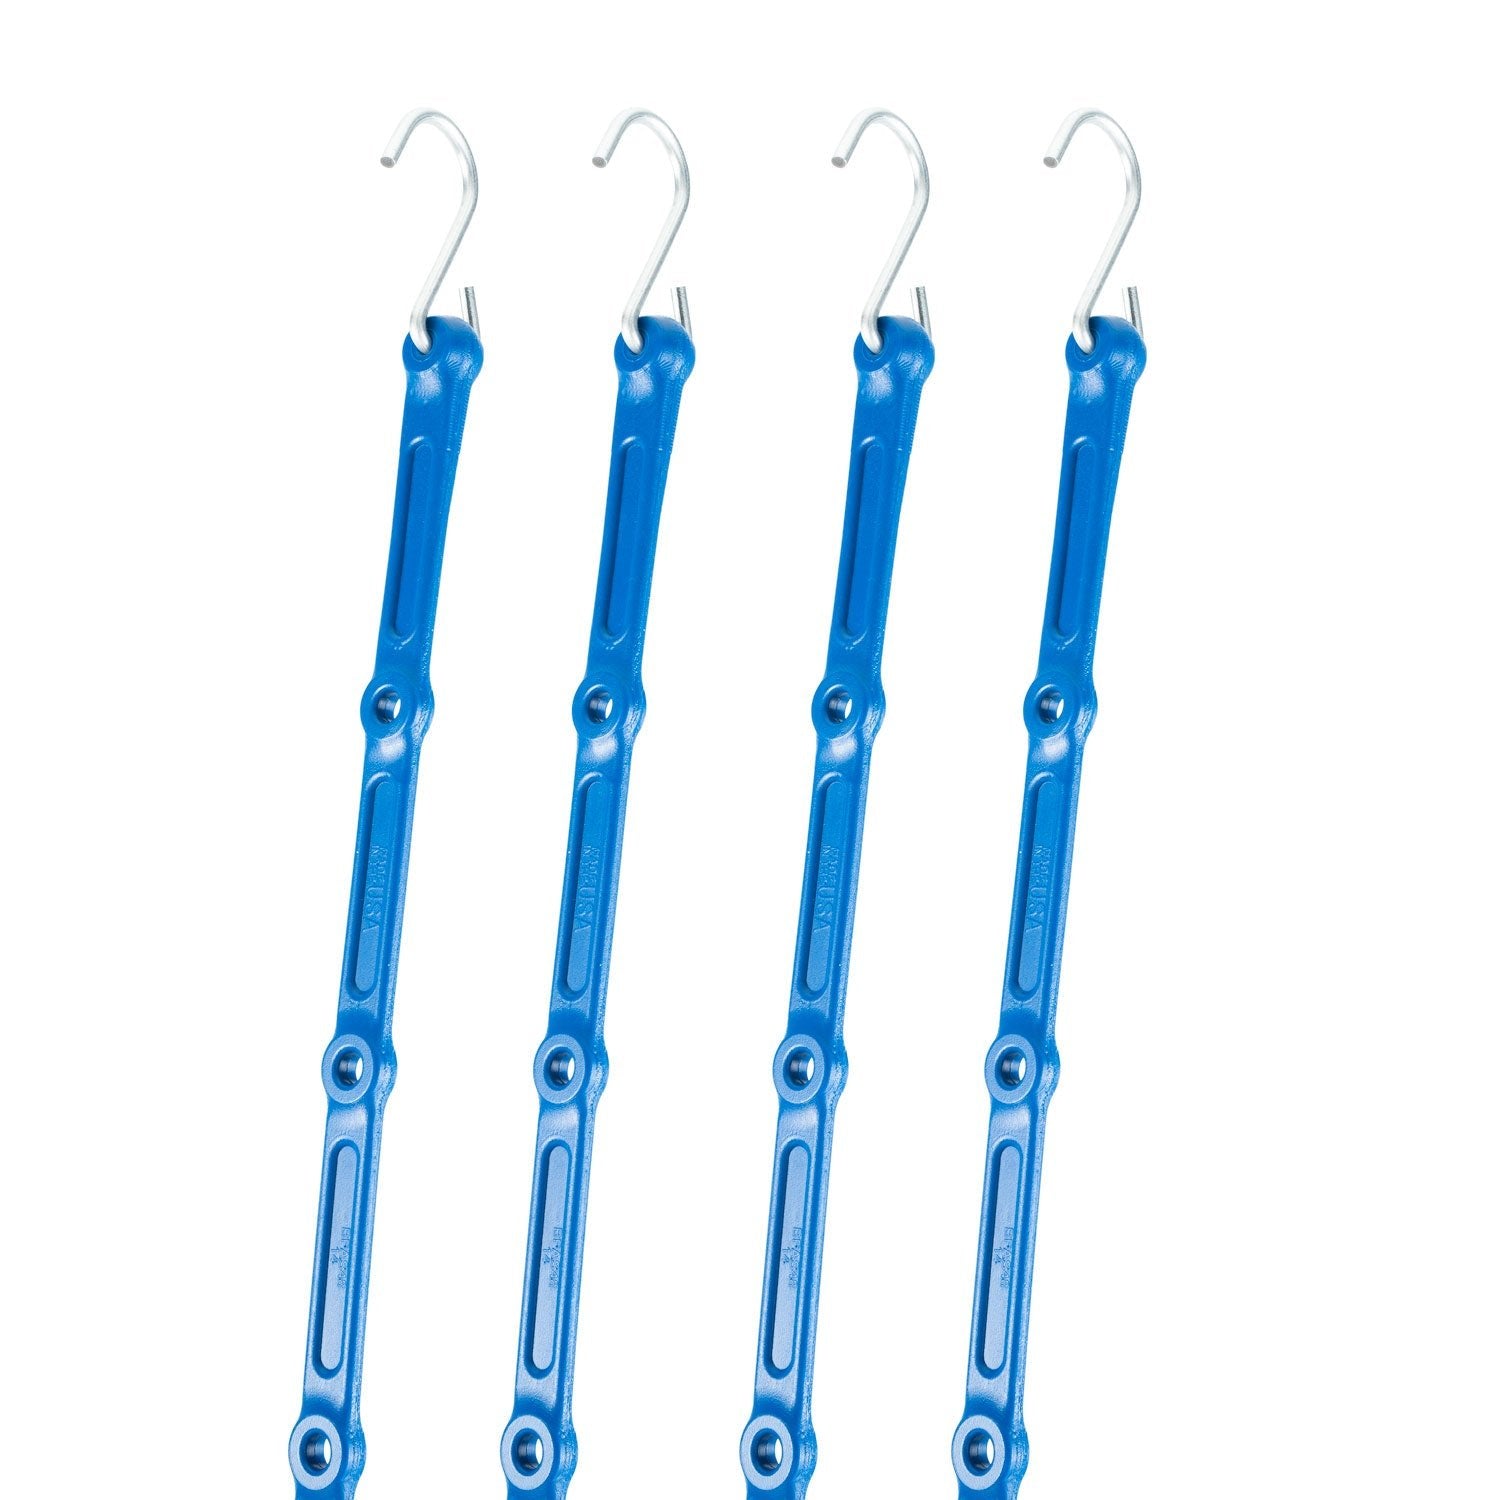 48" Adjust-A-Strap Adjustable Bungee Strap 4 Pack, Galvanized Hooks - The Perfect Bungee & ShockStrap Tie Downs